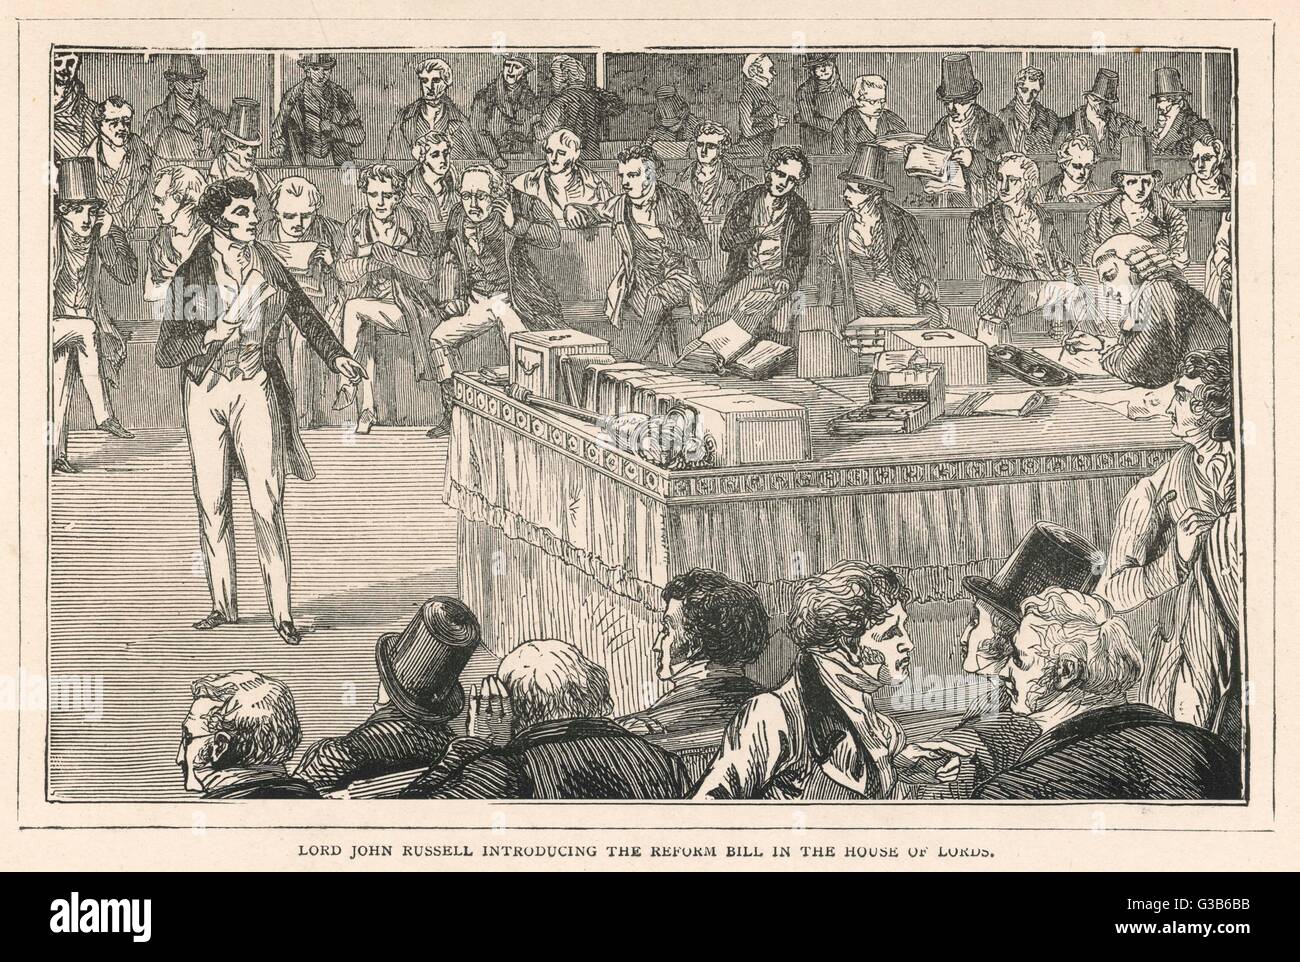 Lord John Russell introducing  the Reform Bill in the House  of Lords        Date: 1832 Stock Photo